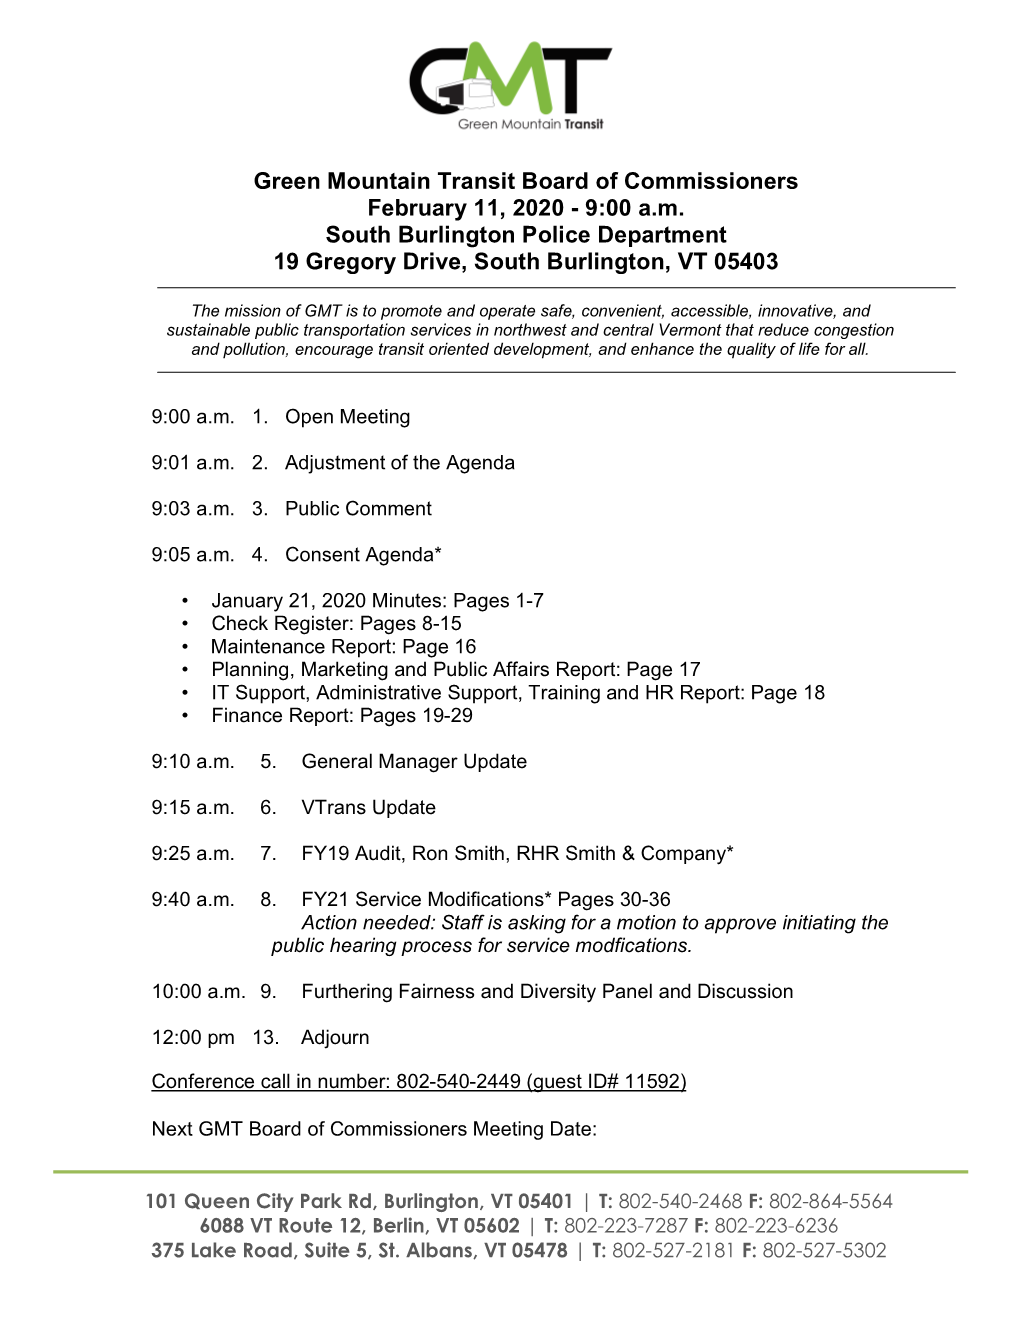 Green Mountain Transit Board of Commissioners February 11, 2020 - 9:00 A.M